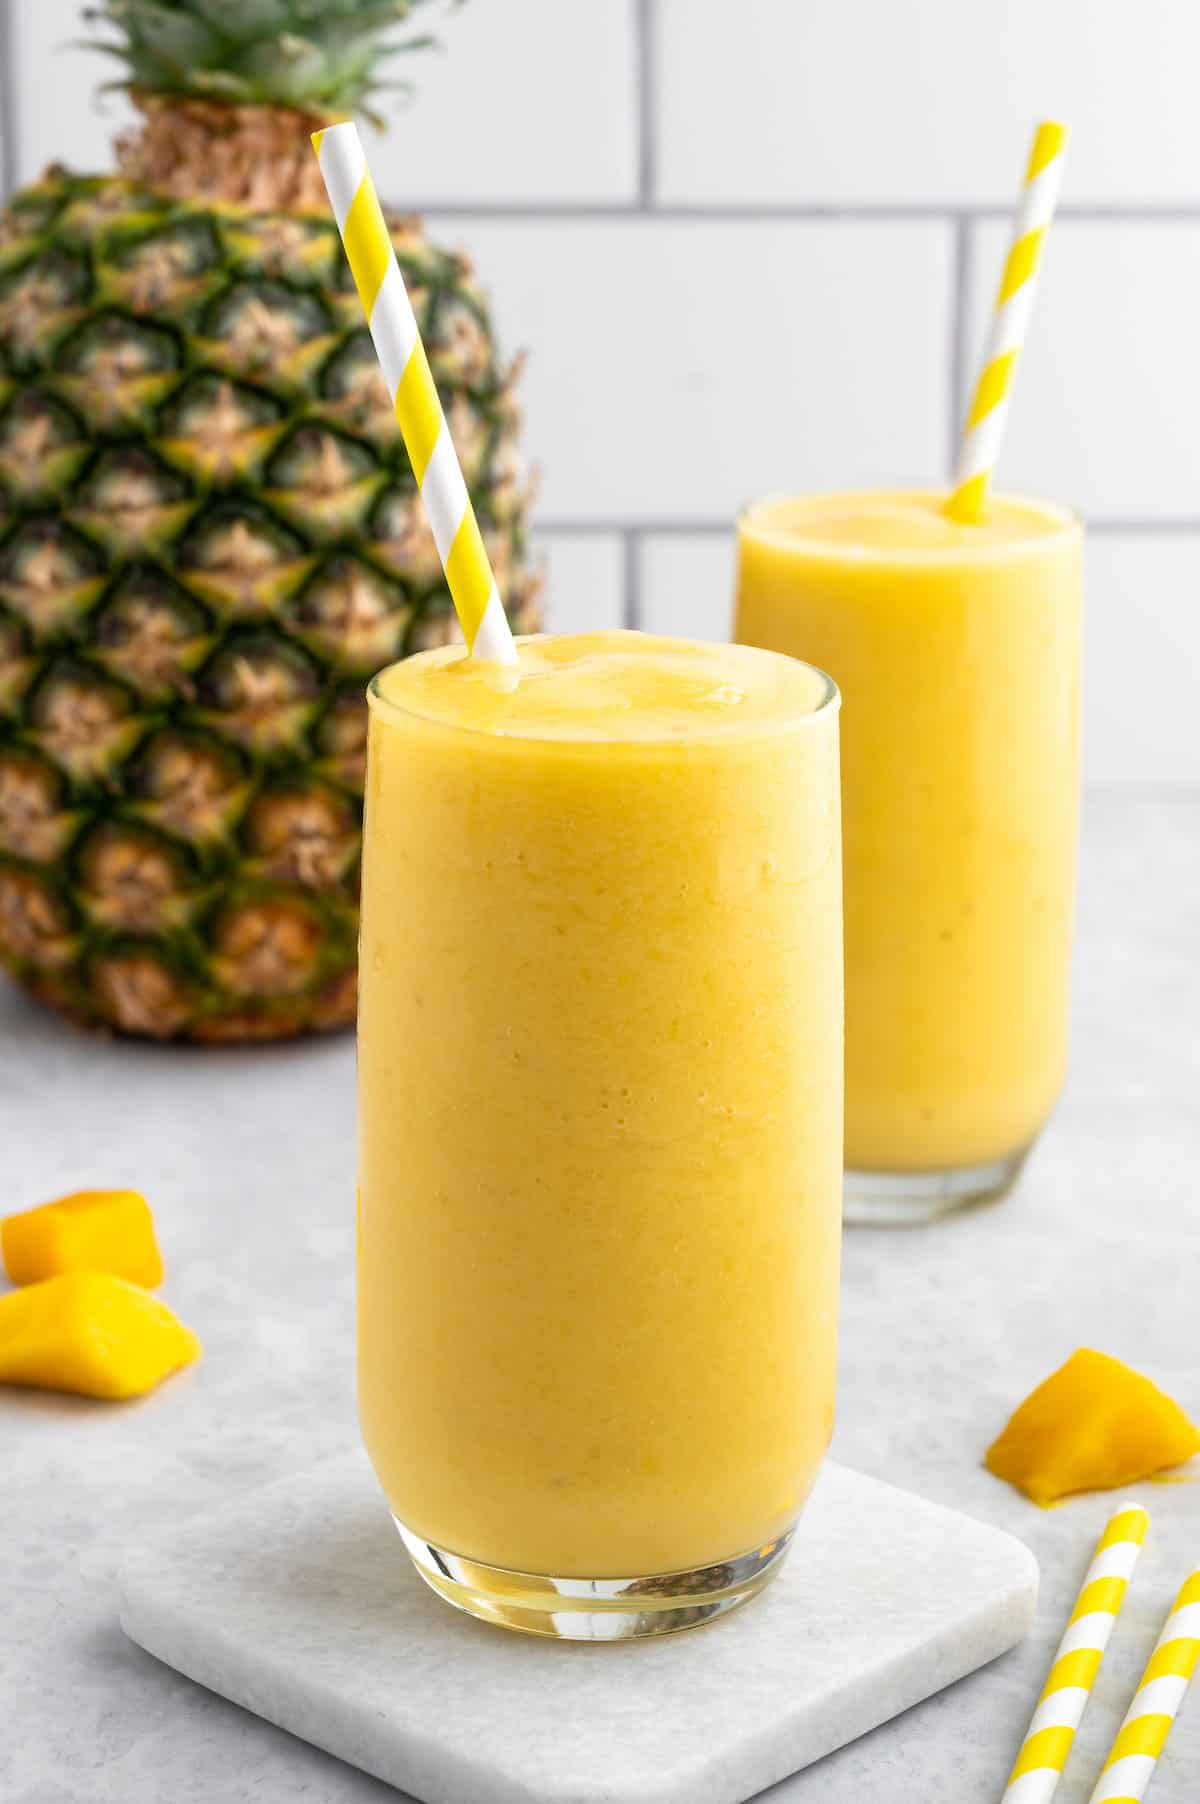 Two glass of mango pineapple smoothie with straws and a whole pineapple in the background.